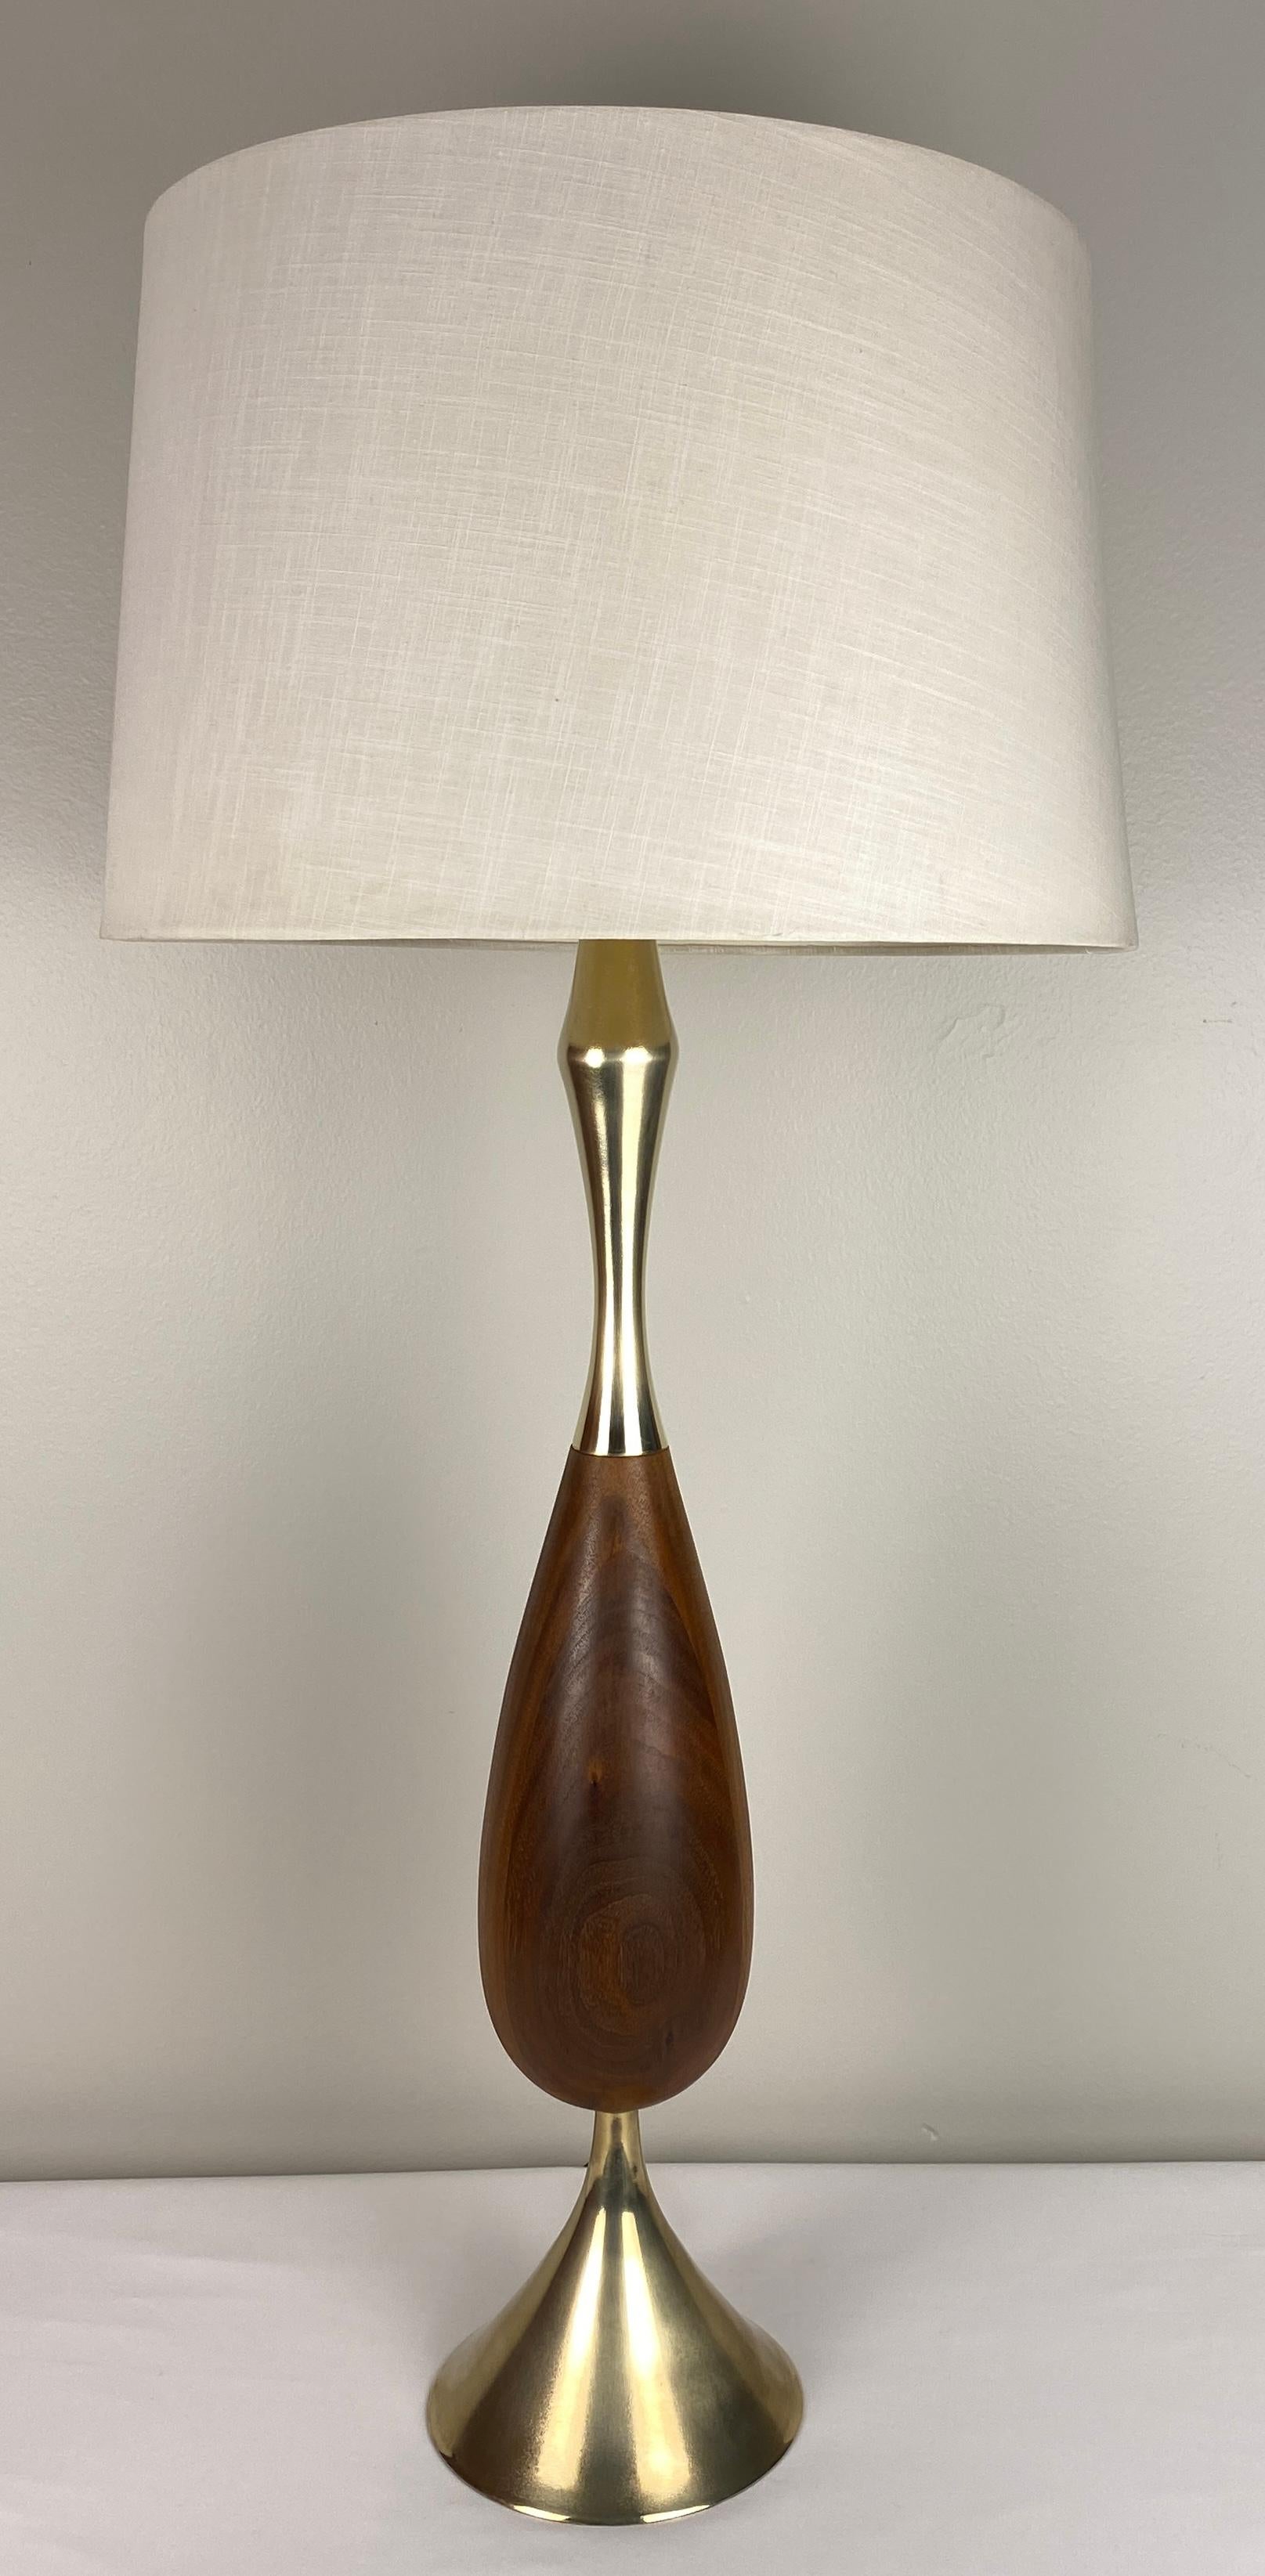 A very stylish table lamp by Tony Paul. 

Tony Paul was a world famous American industrial designer. Above all, he is known for his designs of furniture, dishes and lighting design.

Tony Paul grew up in the Bronx and lived in New York for his